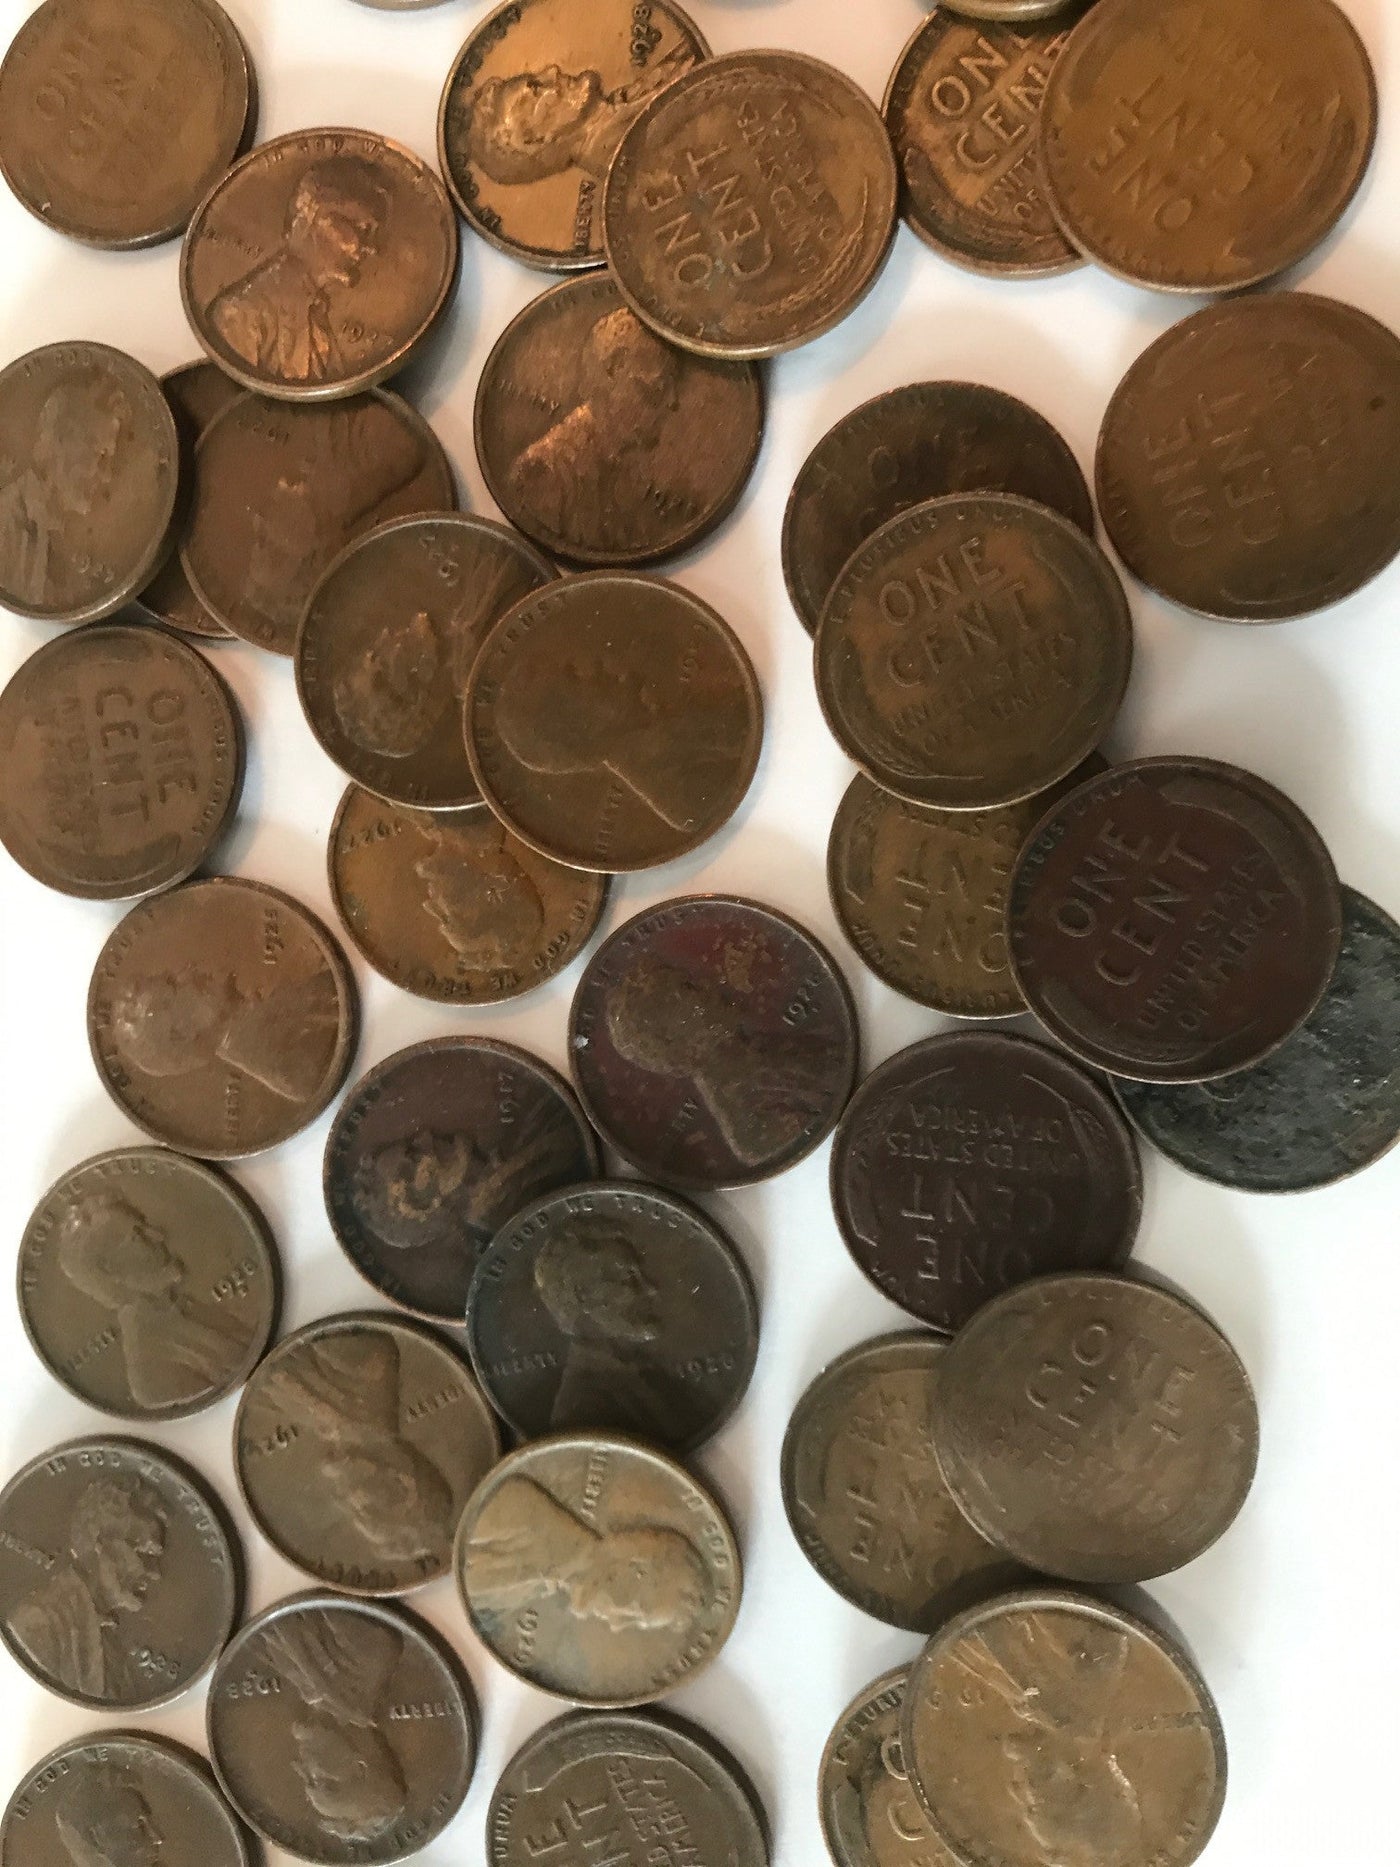 100 Old Wheats Dated before 1959 - US CoinSpot